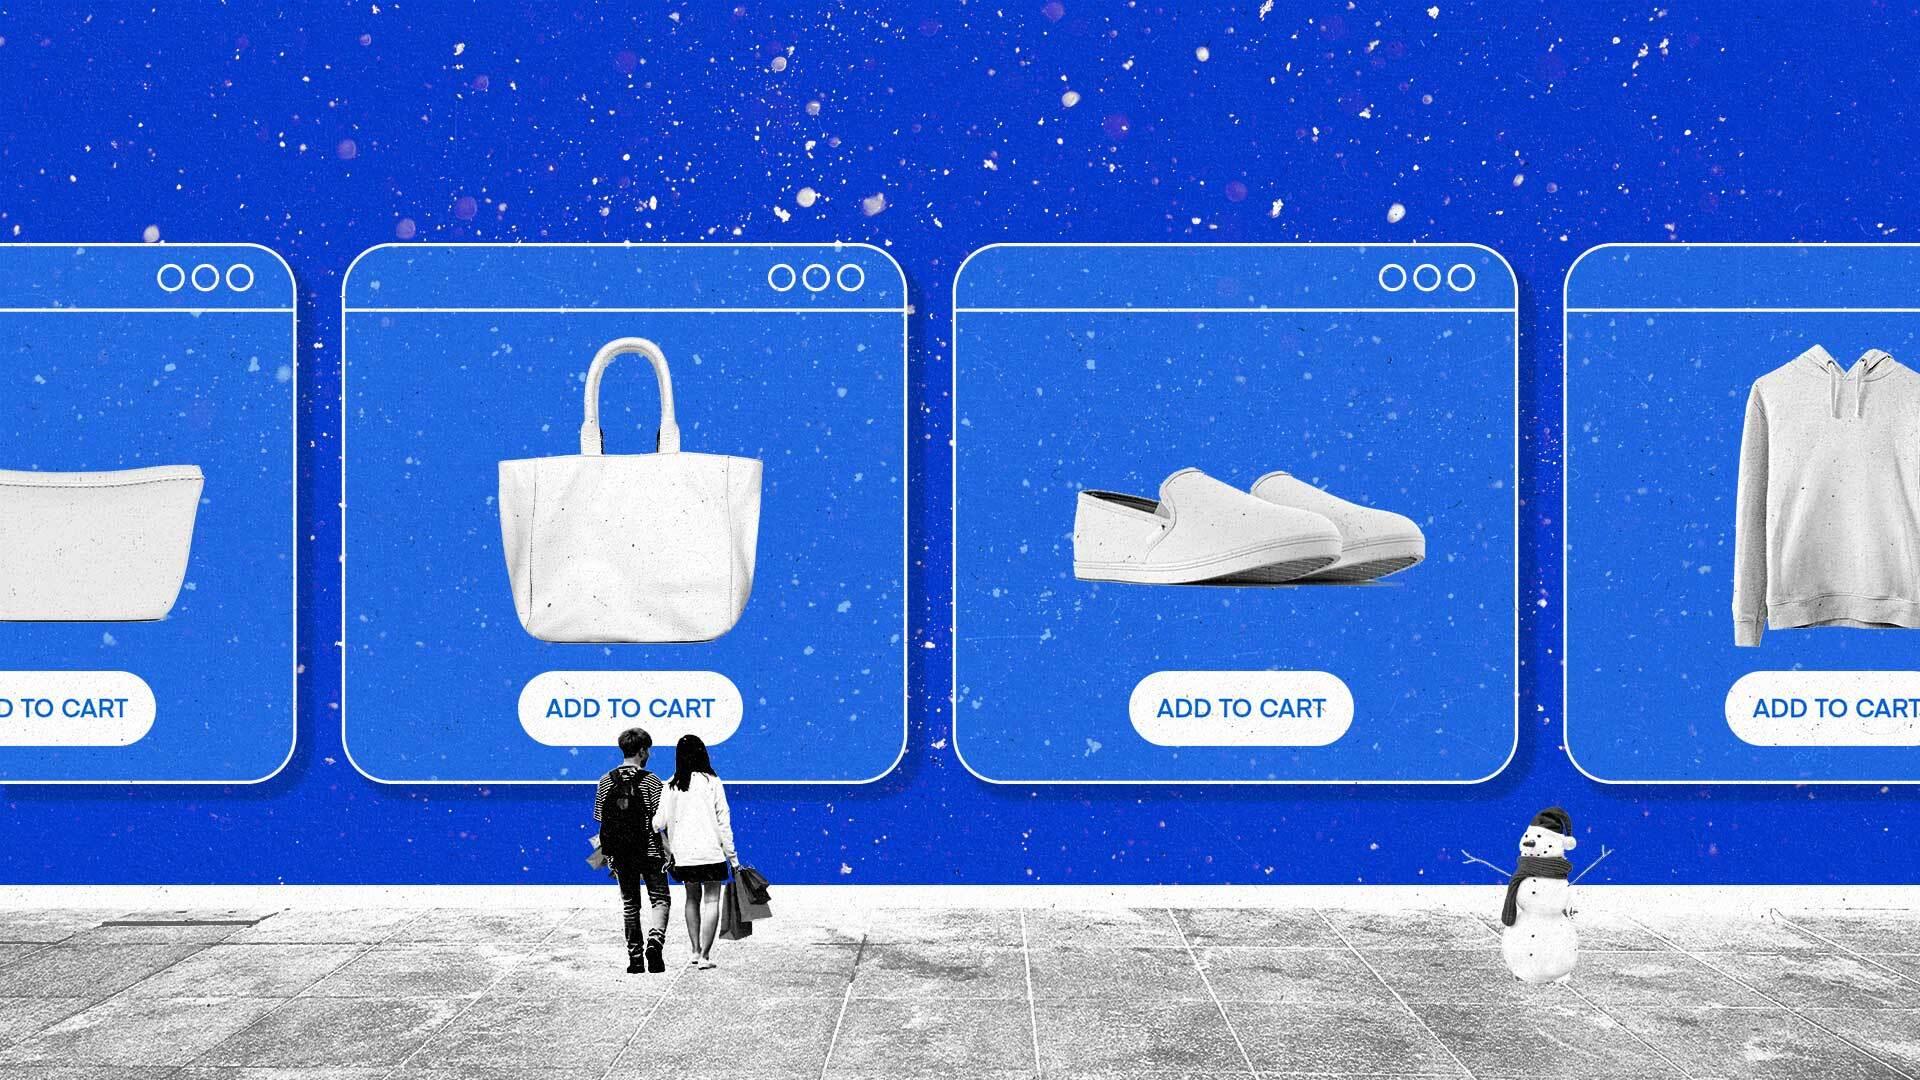 Two shoppers view modal windows showing products and 'Add to cart' buttons in a snowy setting.